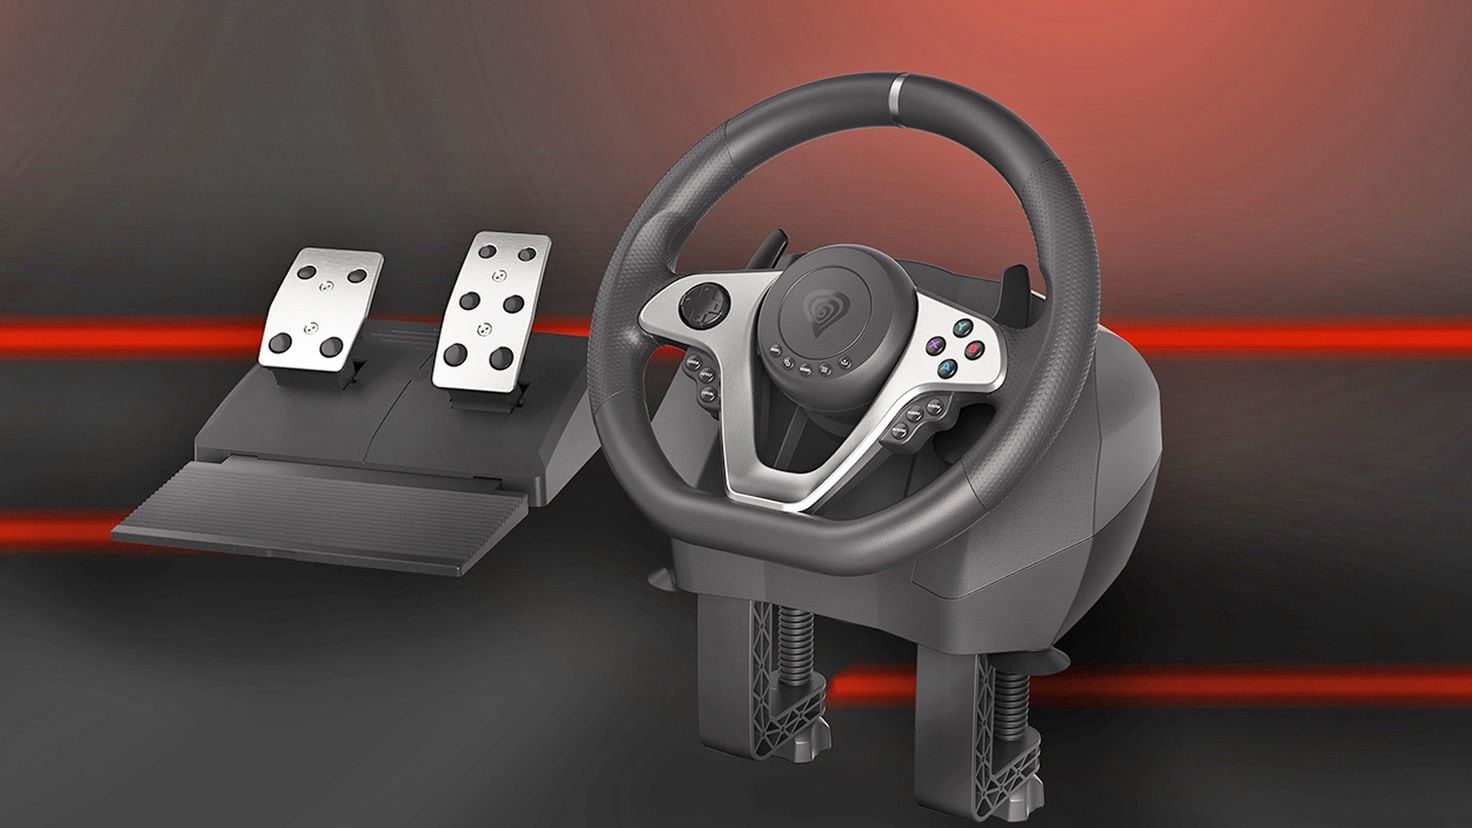 Seaborg 400, a comfortable and versatile steering wheel